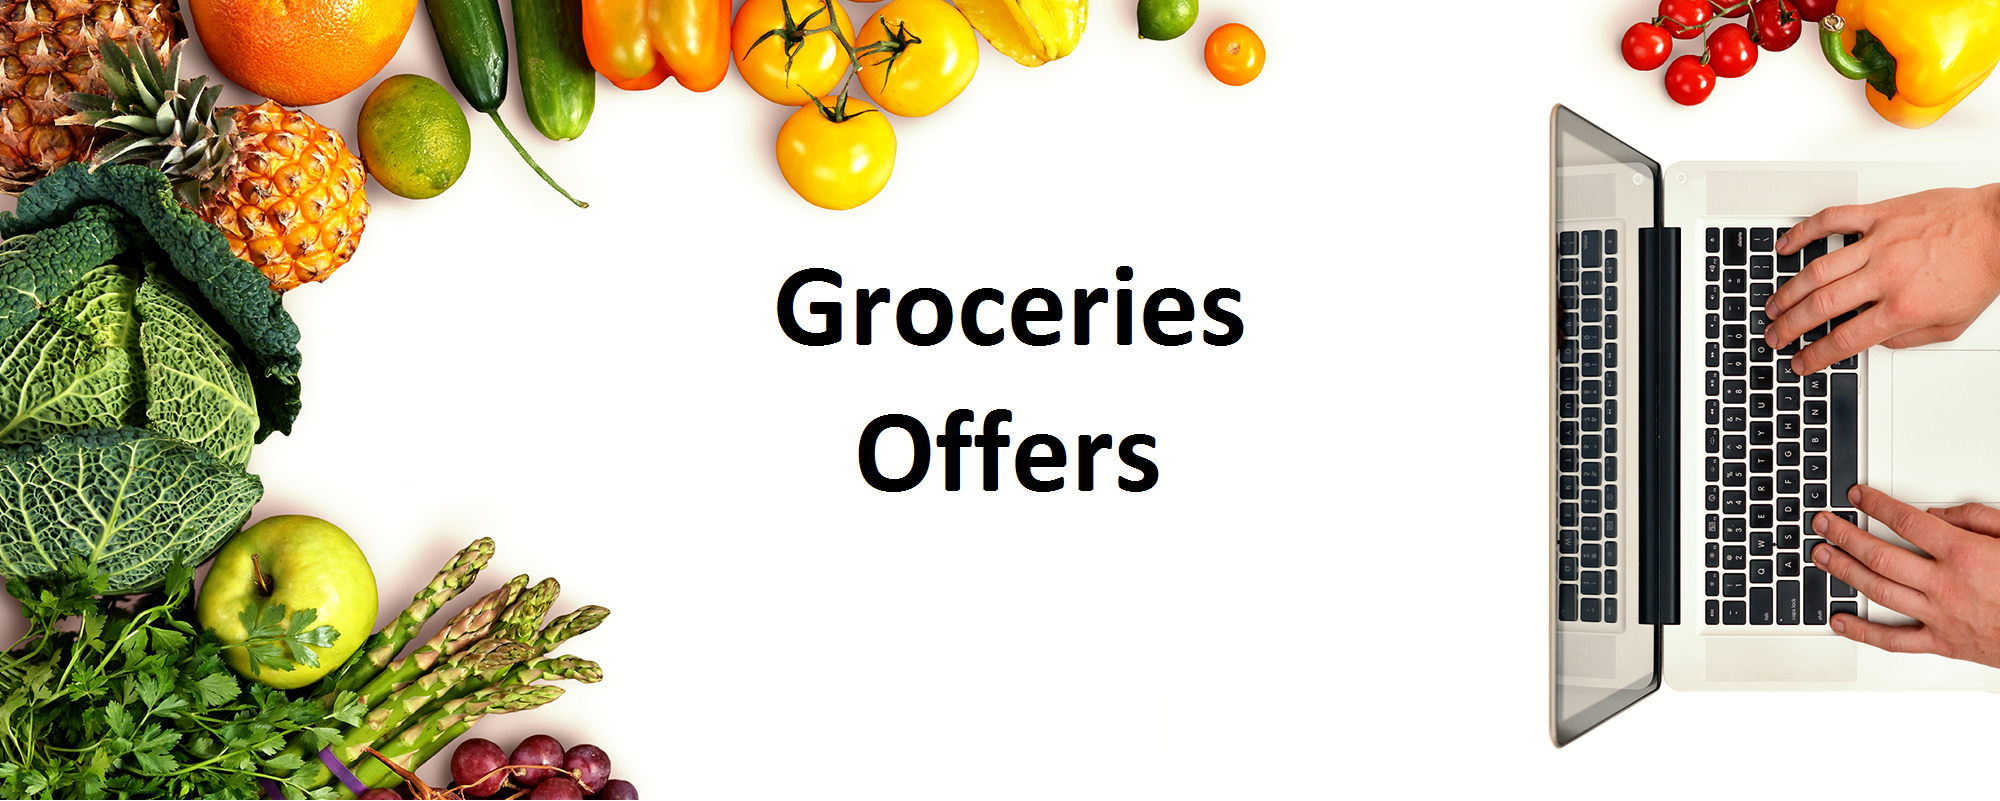  Groceries Offer